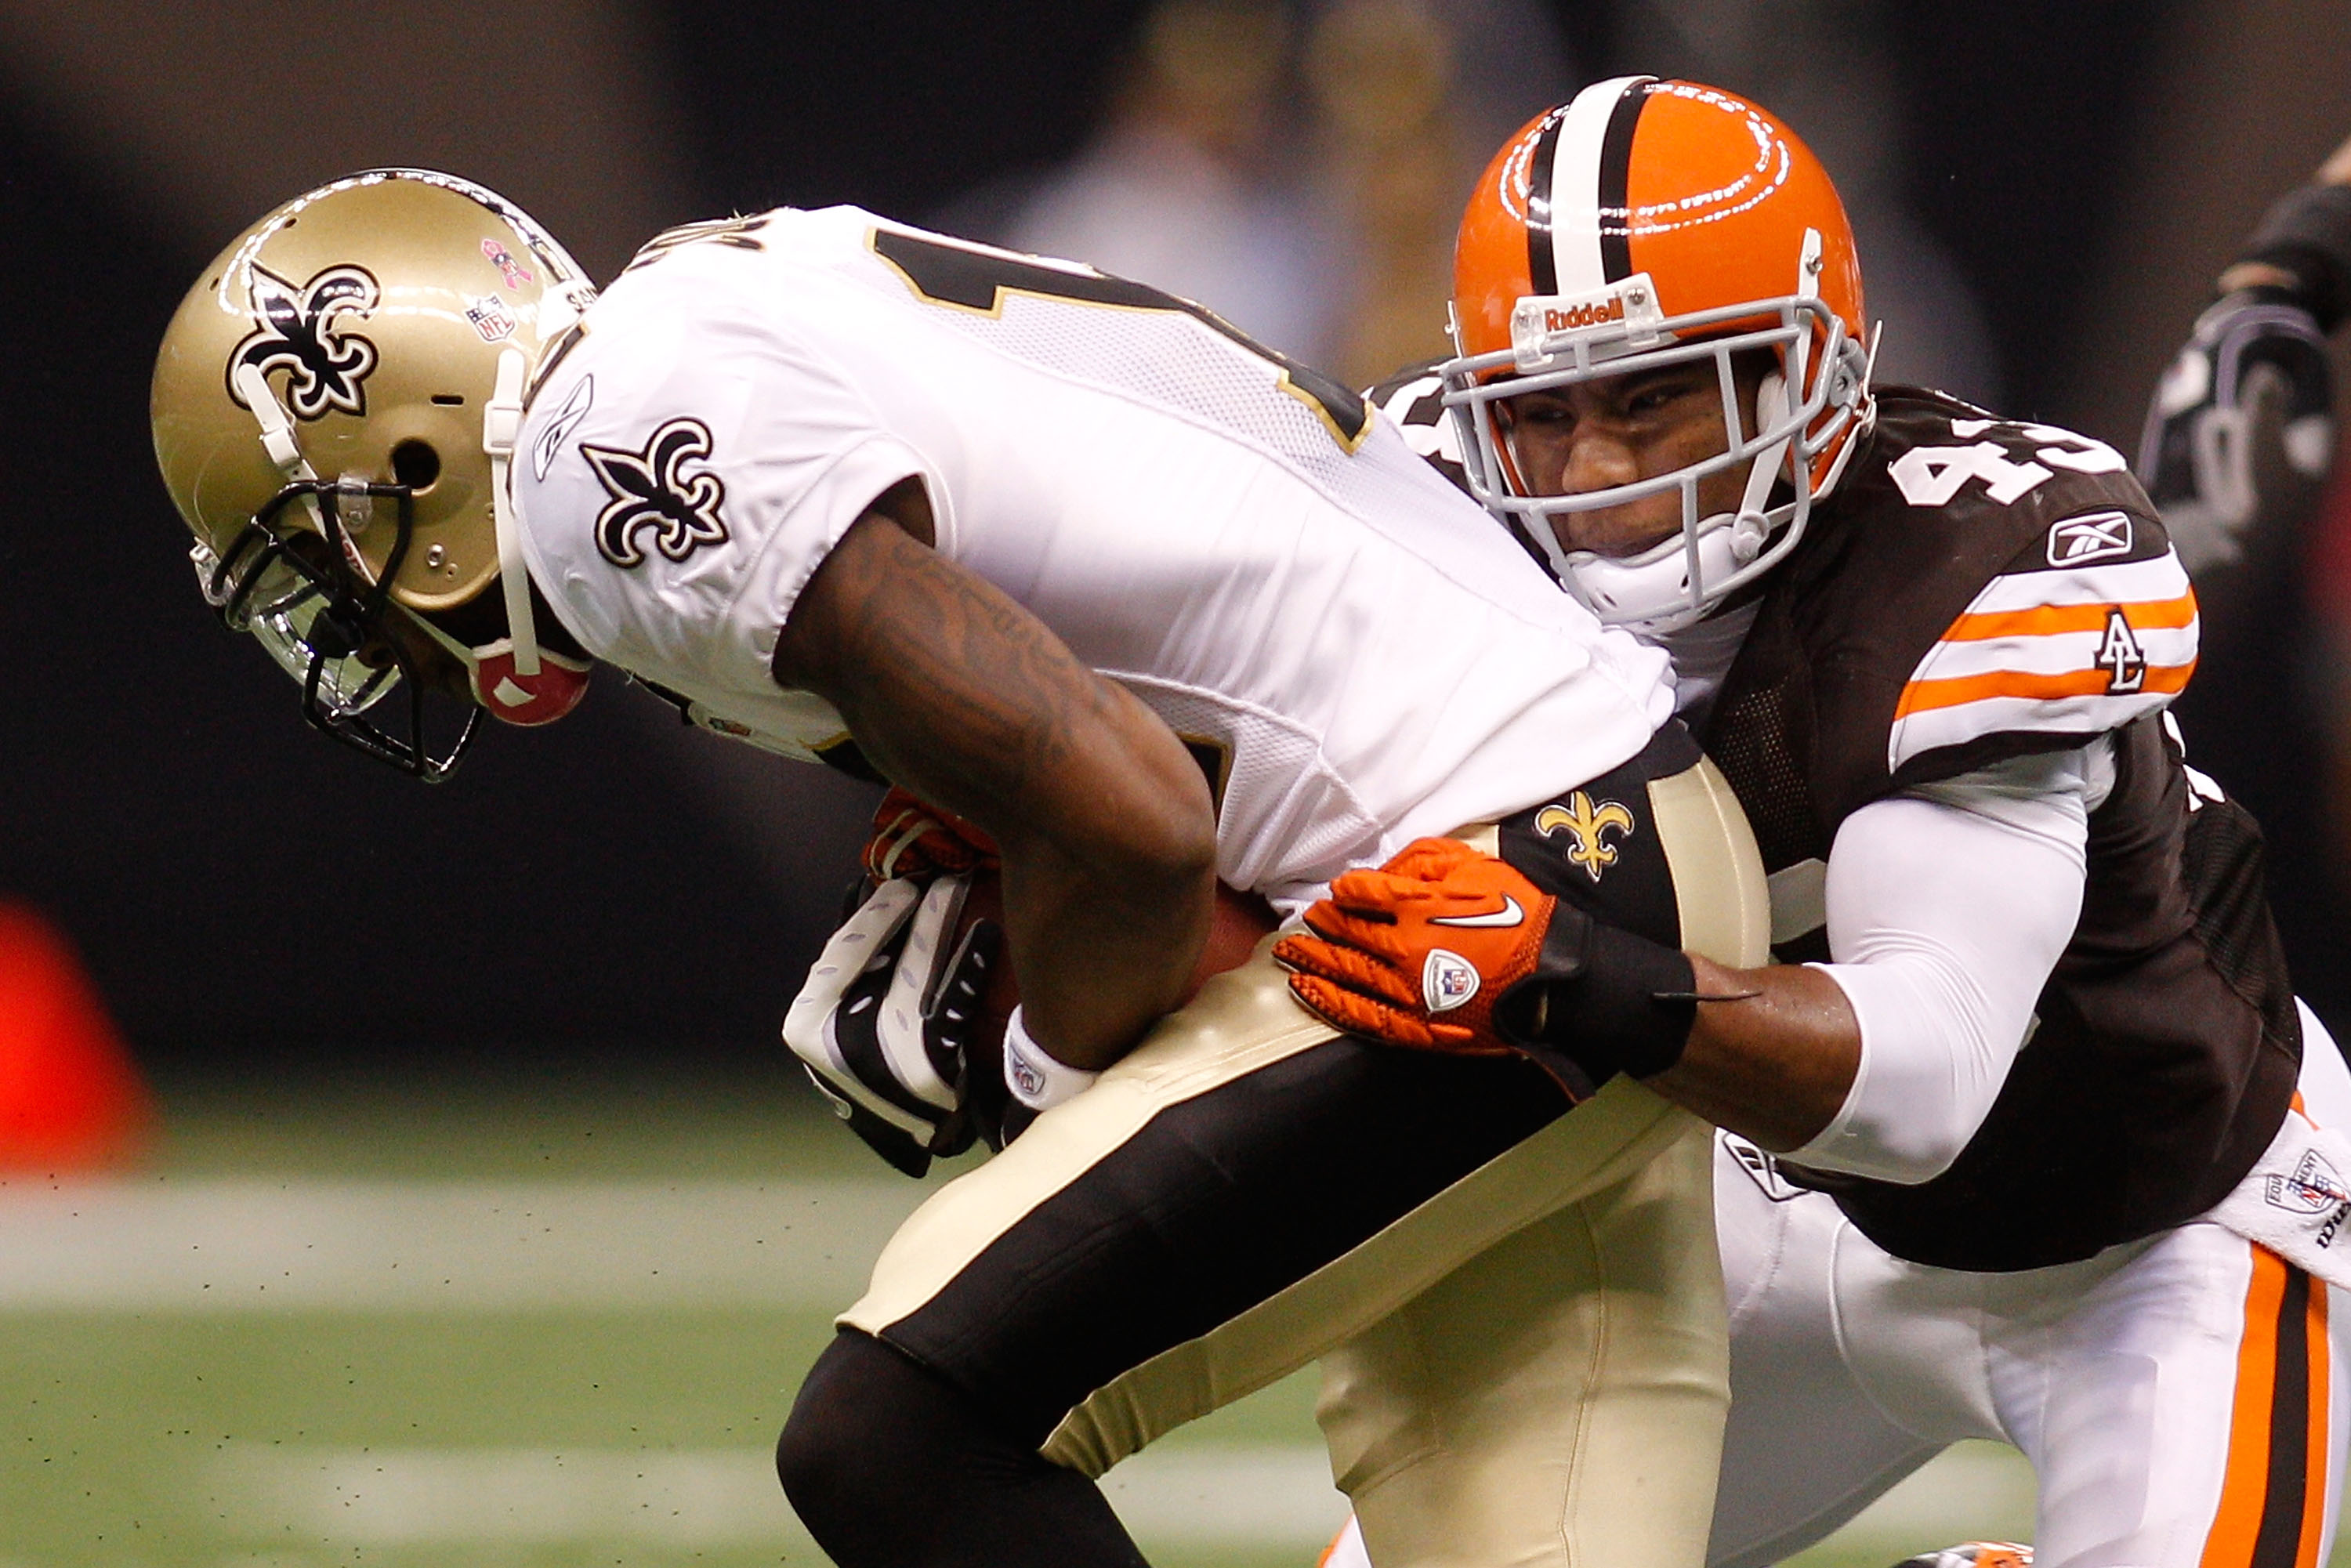 NEW ORLEANS - OCTOBER 24:  Marques Colston #12 of the New Orleans Saints is tackled by T.J. Ward #43 of the Cleveland Browns at the Louisiana Superdome on October 24, 2010 in New Orleans, Louisiana.  (Photo by Chris Graythen/Getty Images)